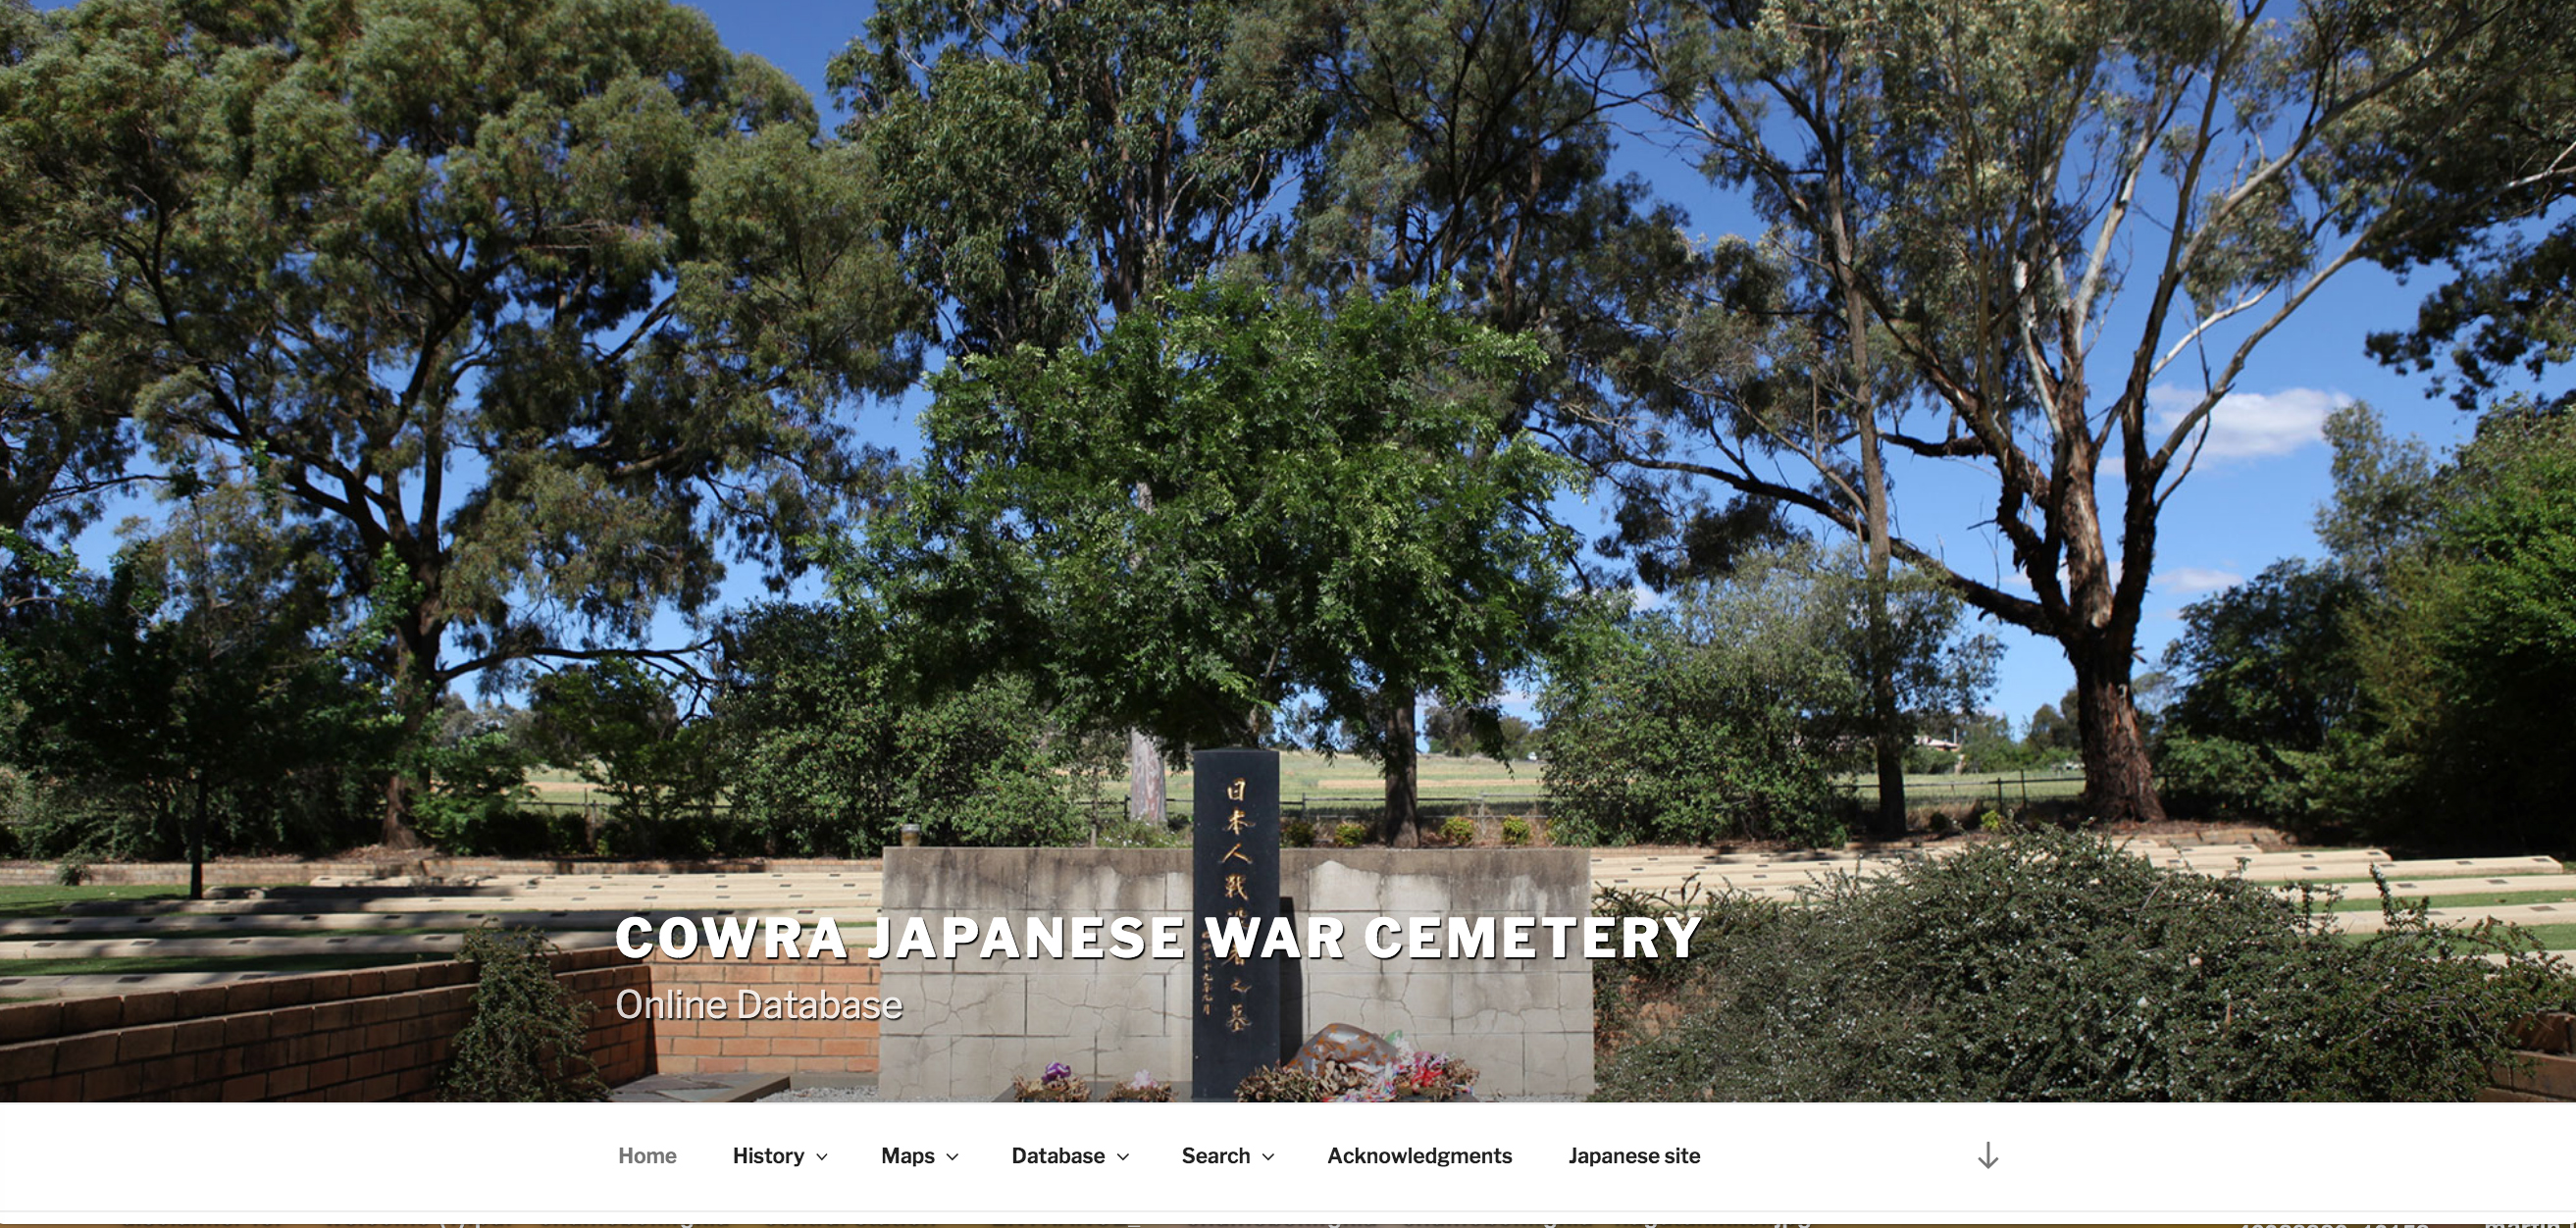 The Sydney launch of Cowra Voices and Cowra Japanese War Cemetery Online Database:  4 September 2019